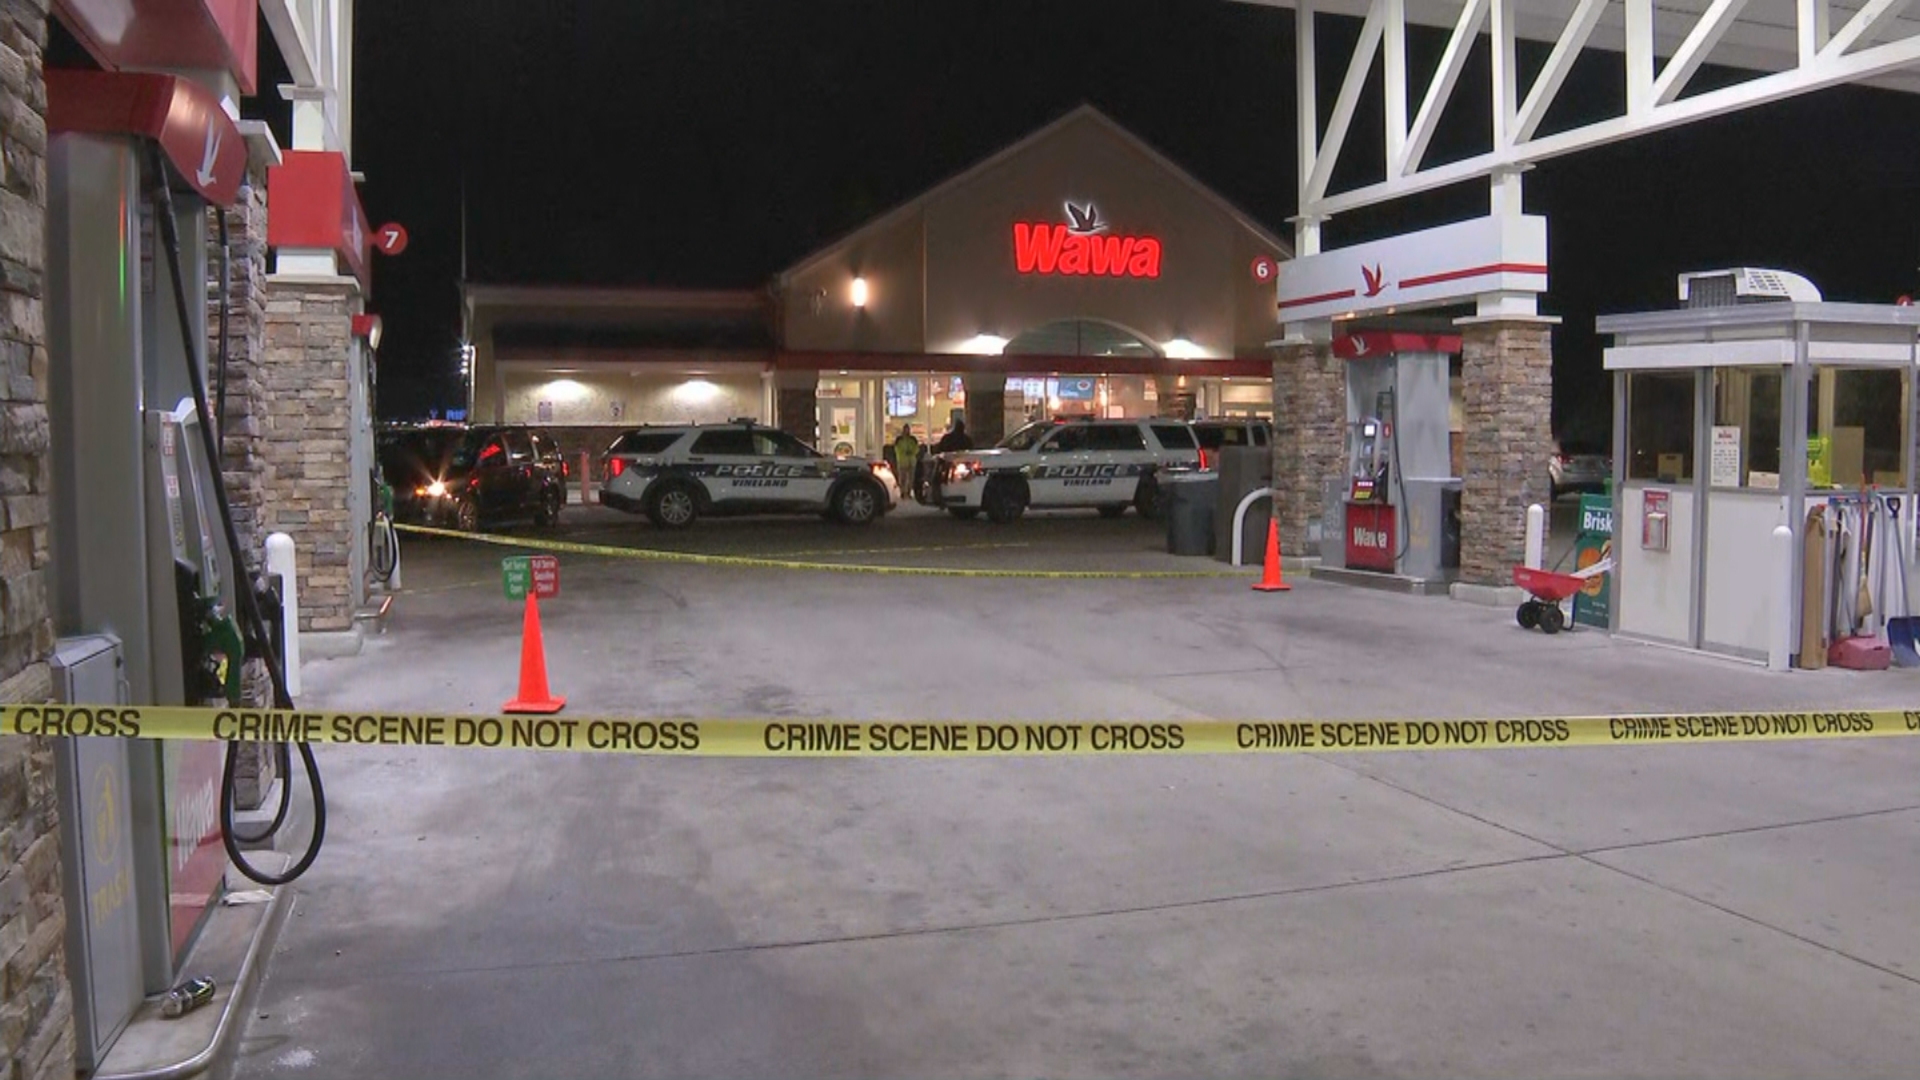 Man Arrested In New York For Deadly Shooting At Vineland Wawa